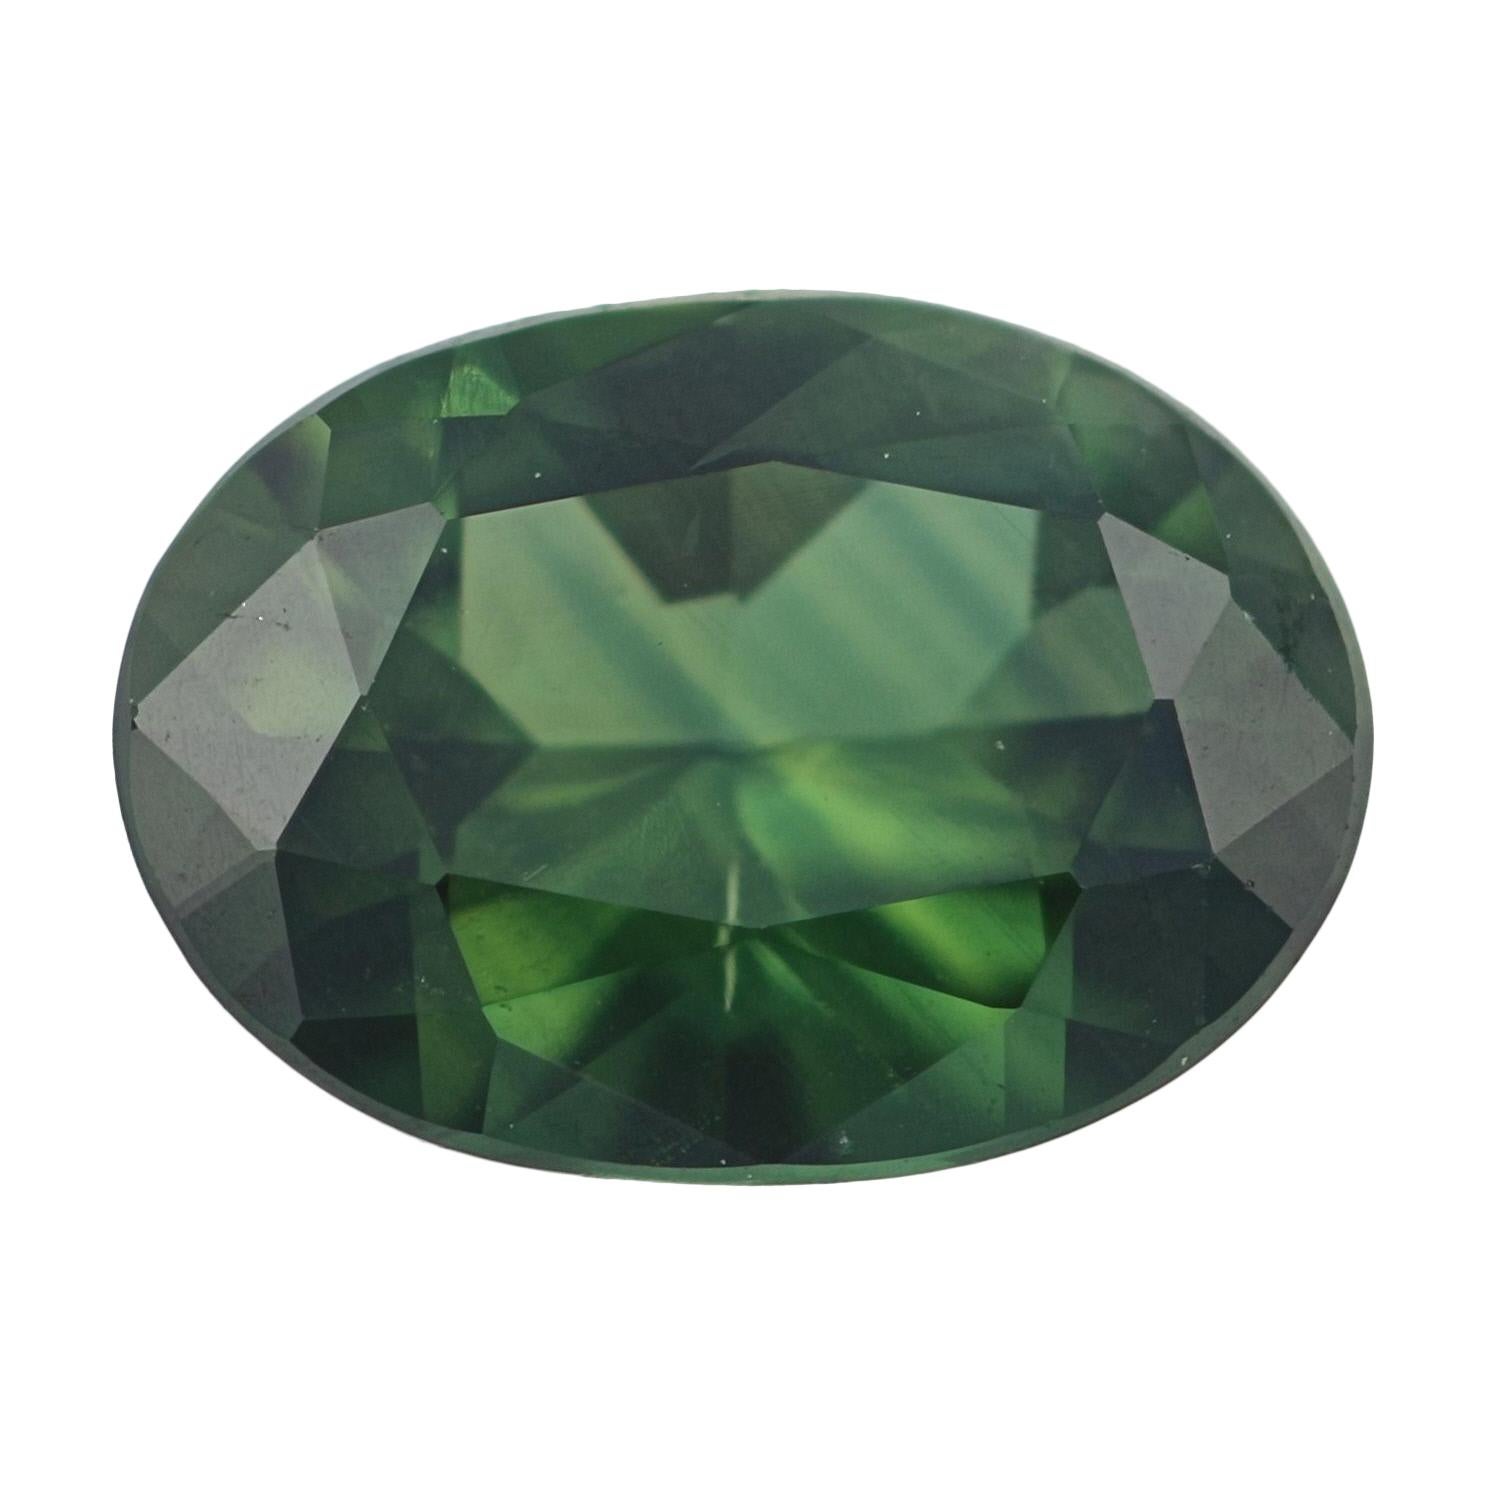 Shape/Cut: Oval 
Treatment: Heating
Color: Green 
Dimensions (mm): 7.84 x 5.88 x 3.36 
Weight: 1.22ct 

Condition: New  

Please check out the enlarged pictures.

Thank you for taking the time to read our description. If you have any questions,